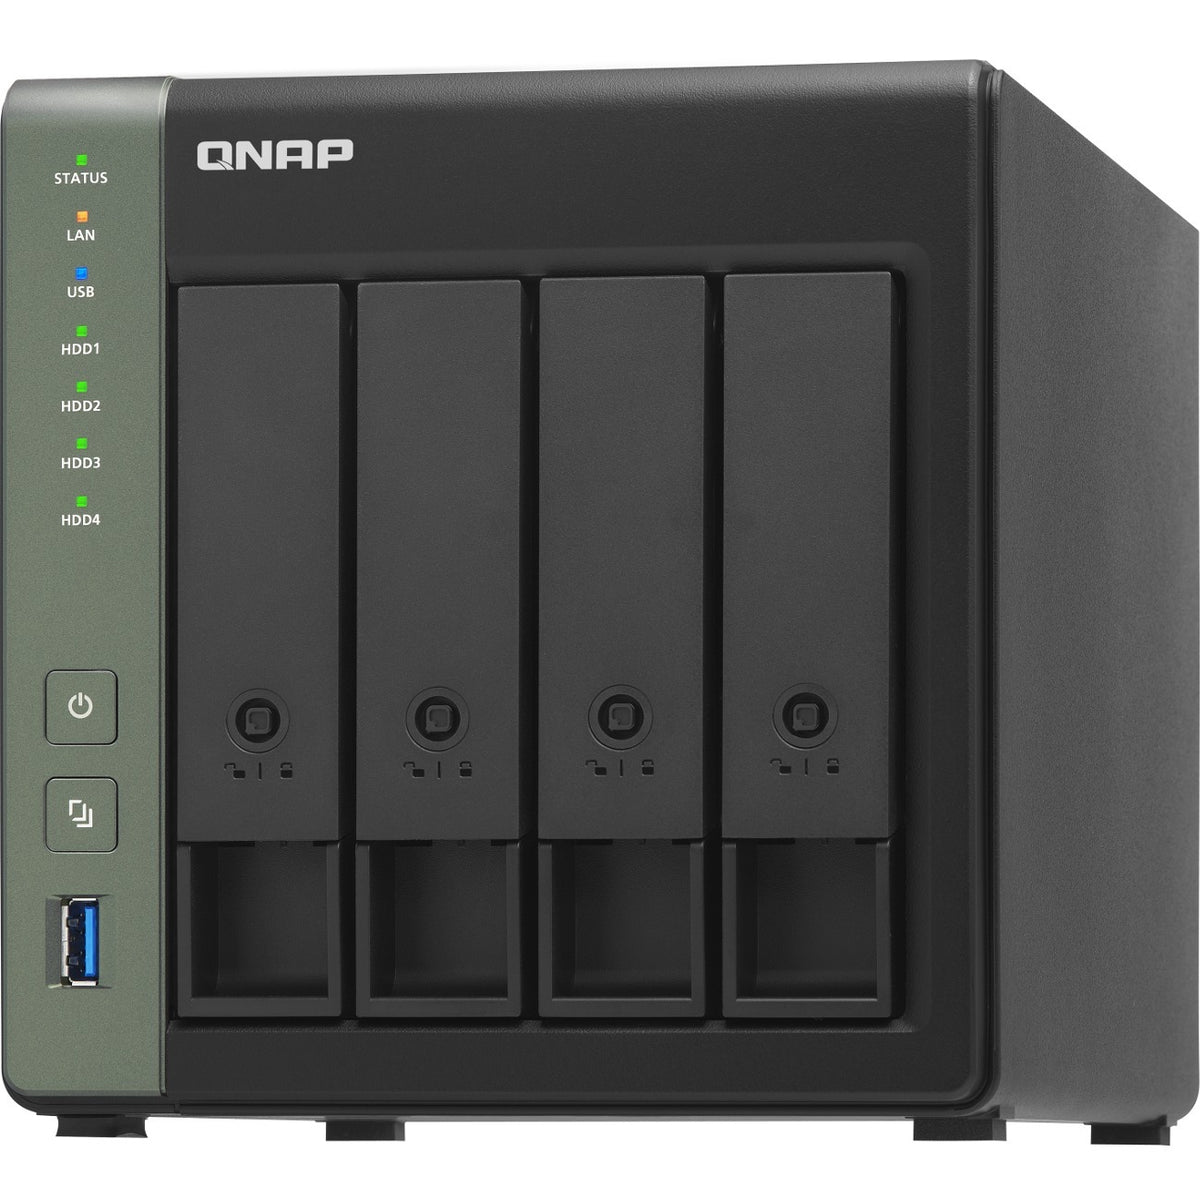 QNAP Cost-effective Business NAS with Integrated 10GbE SFP+ Port - TS-431X3-4G-US